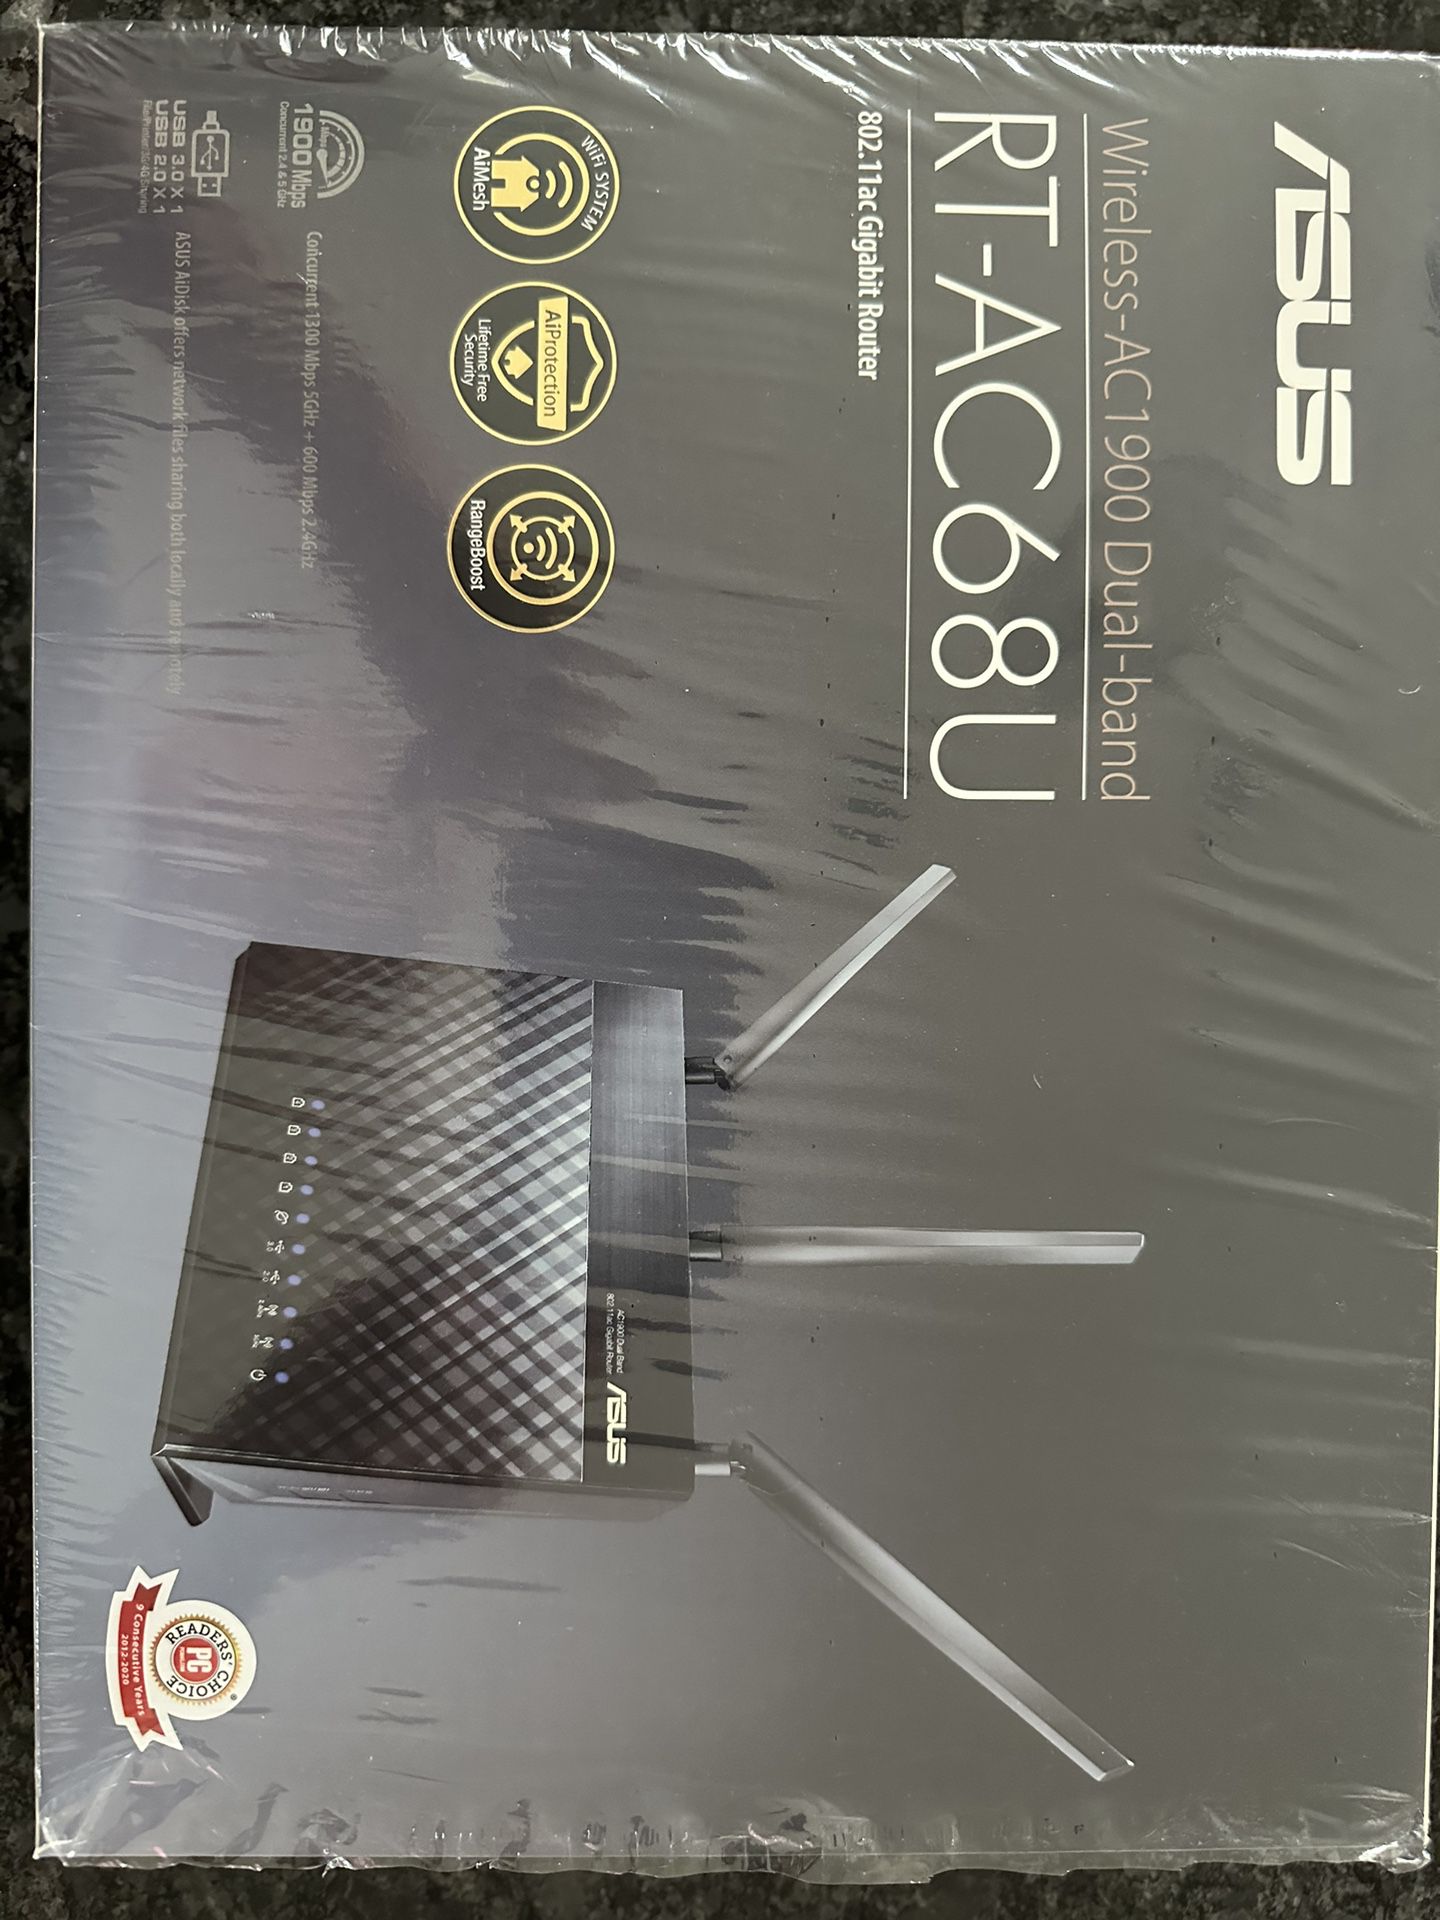 ASUS AC1900 WiFi Gaming Router (RT-AC68U) - Dual Band Gigabit Wireless Internet Router, Gaming & Streaming, AiMesh Compatible, Included Lifetime Inter